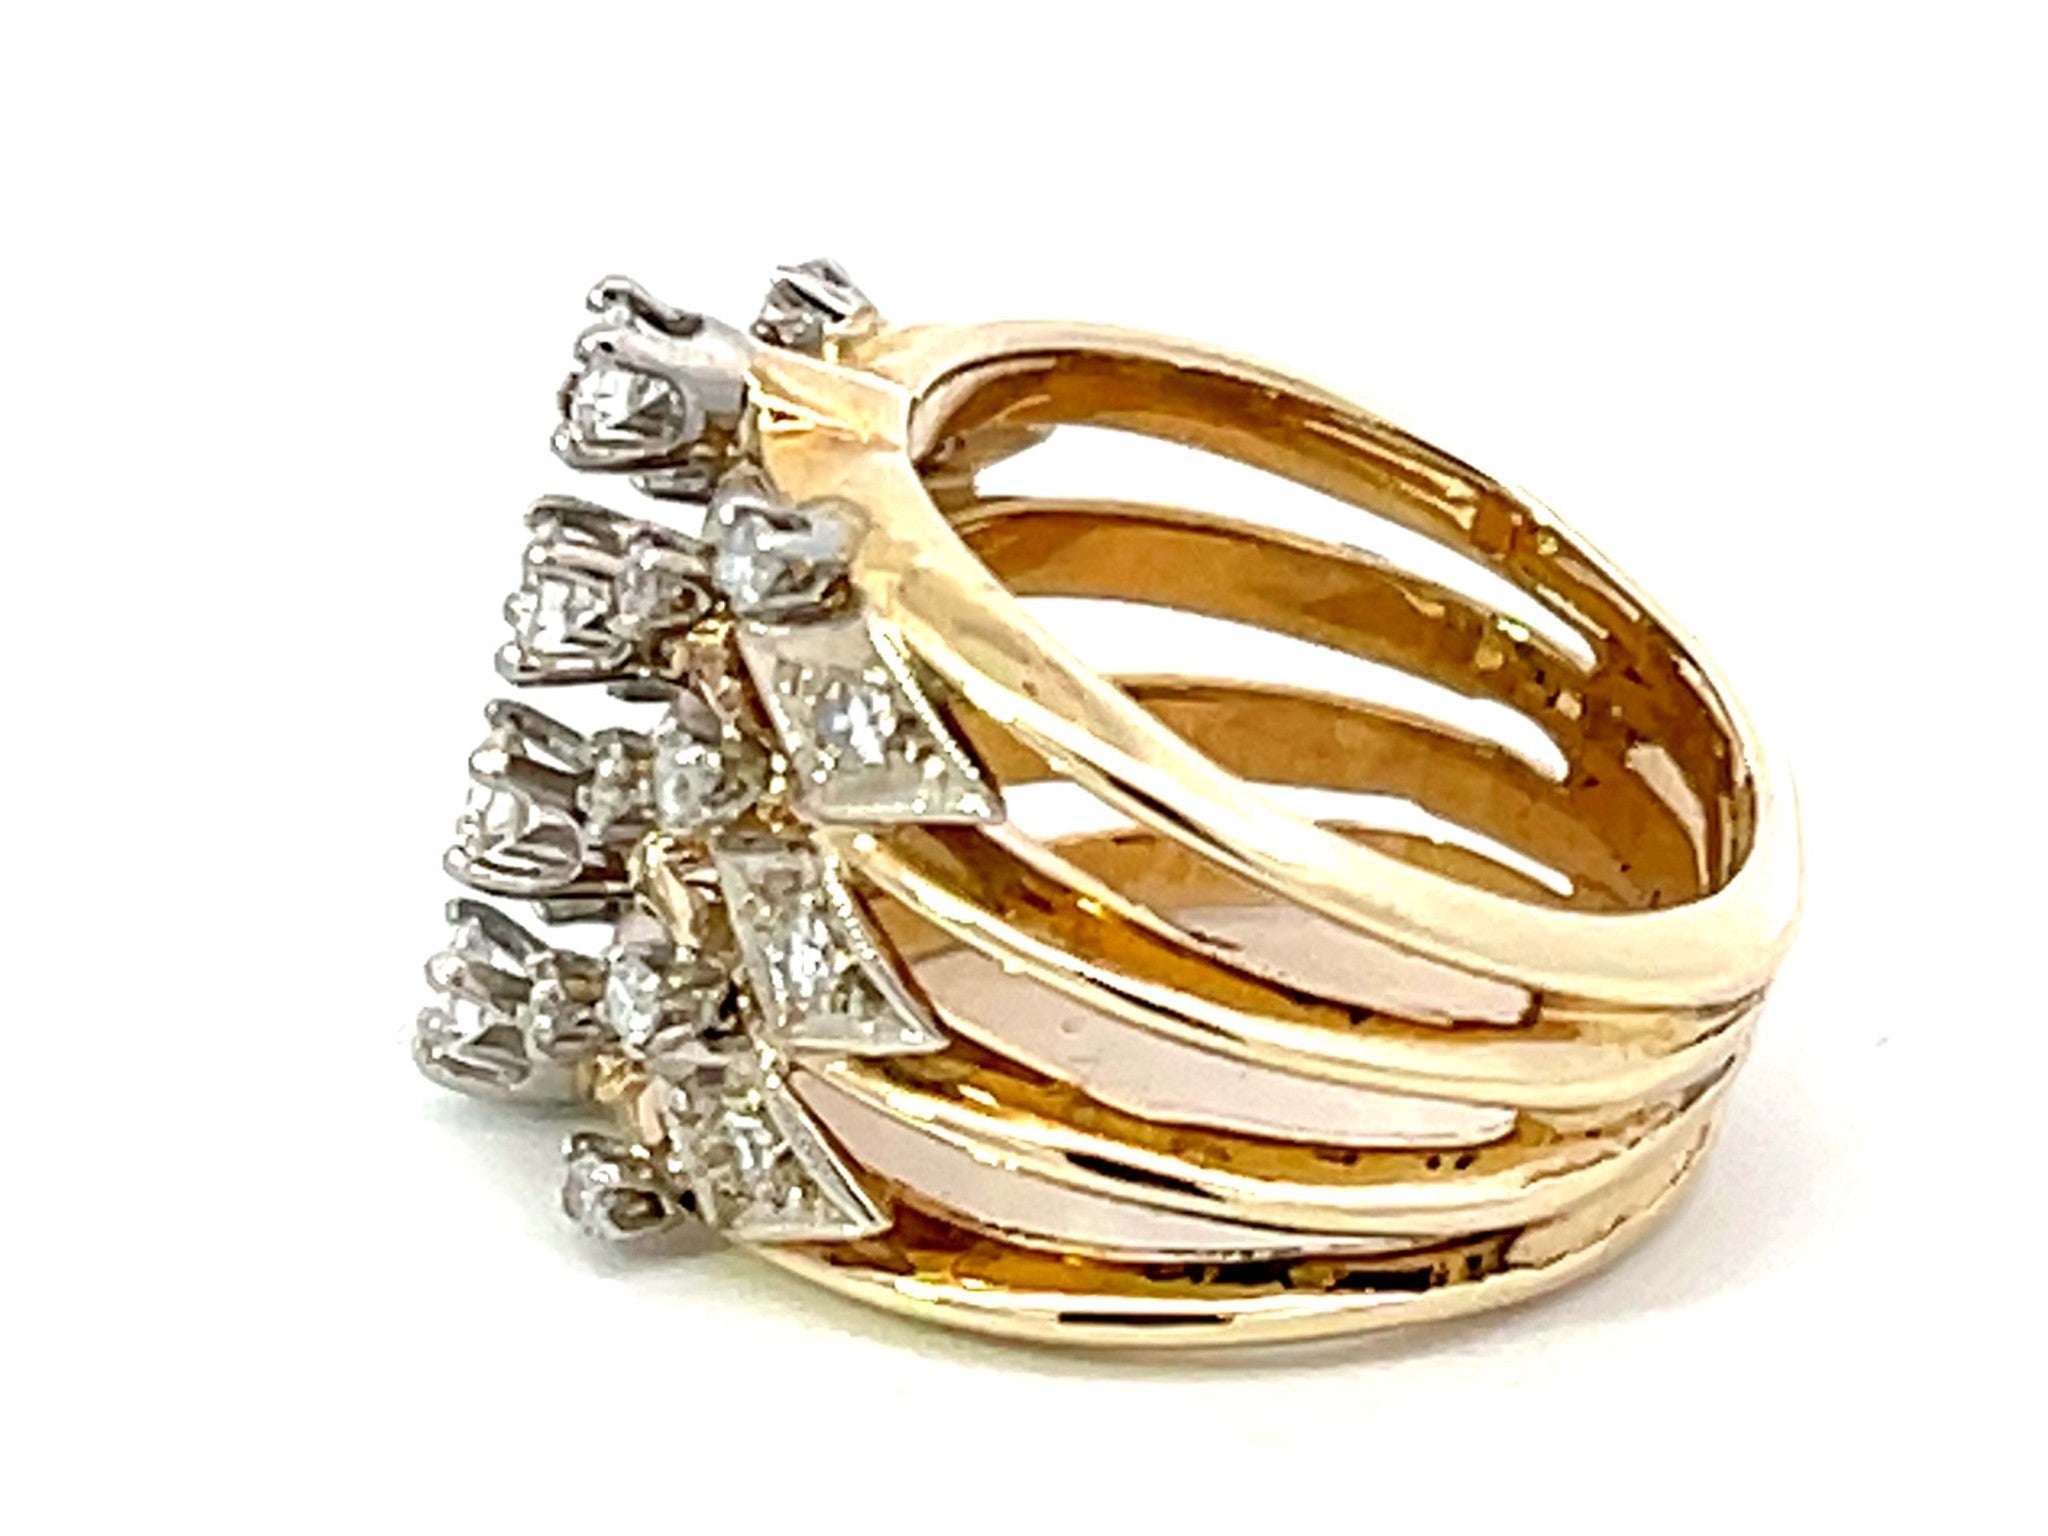 Wide Diamond Band Cutout Design Ring in 14K Yellow Gold